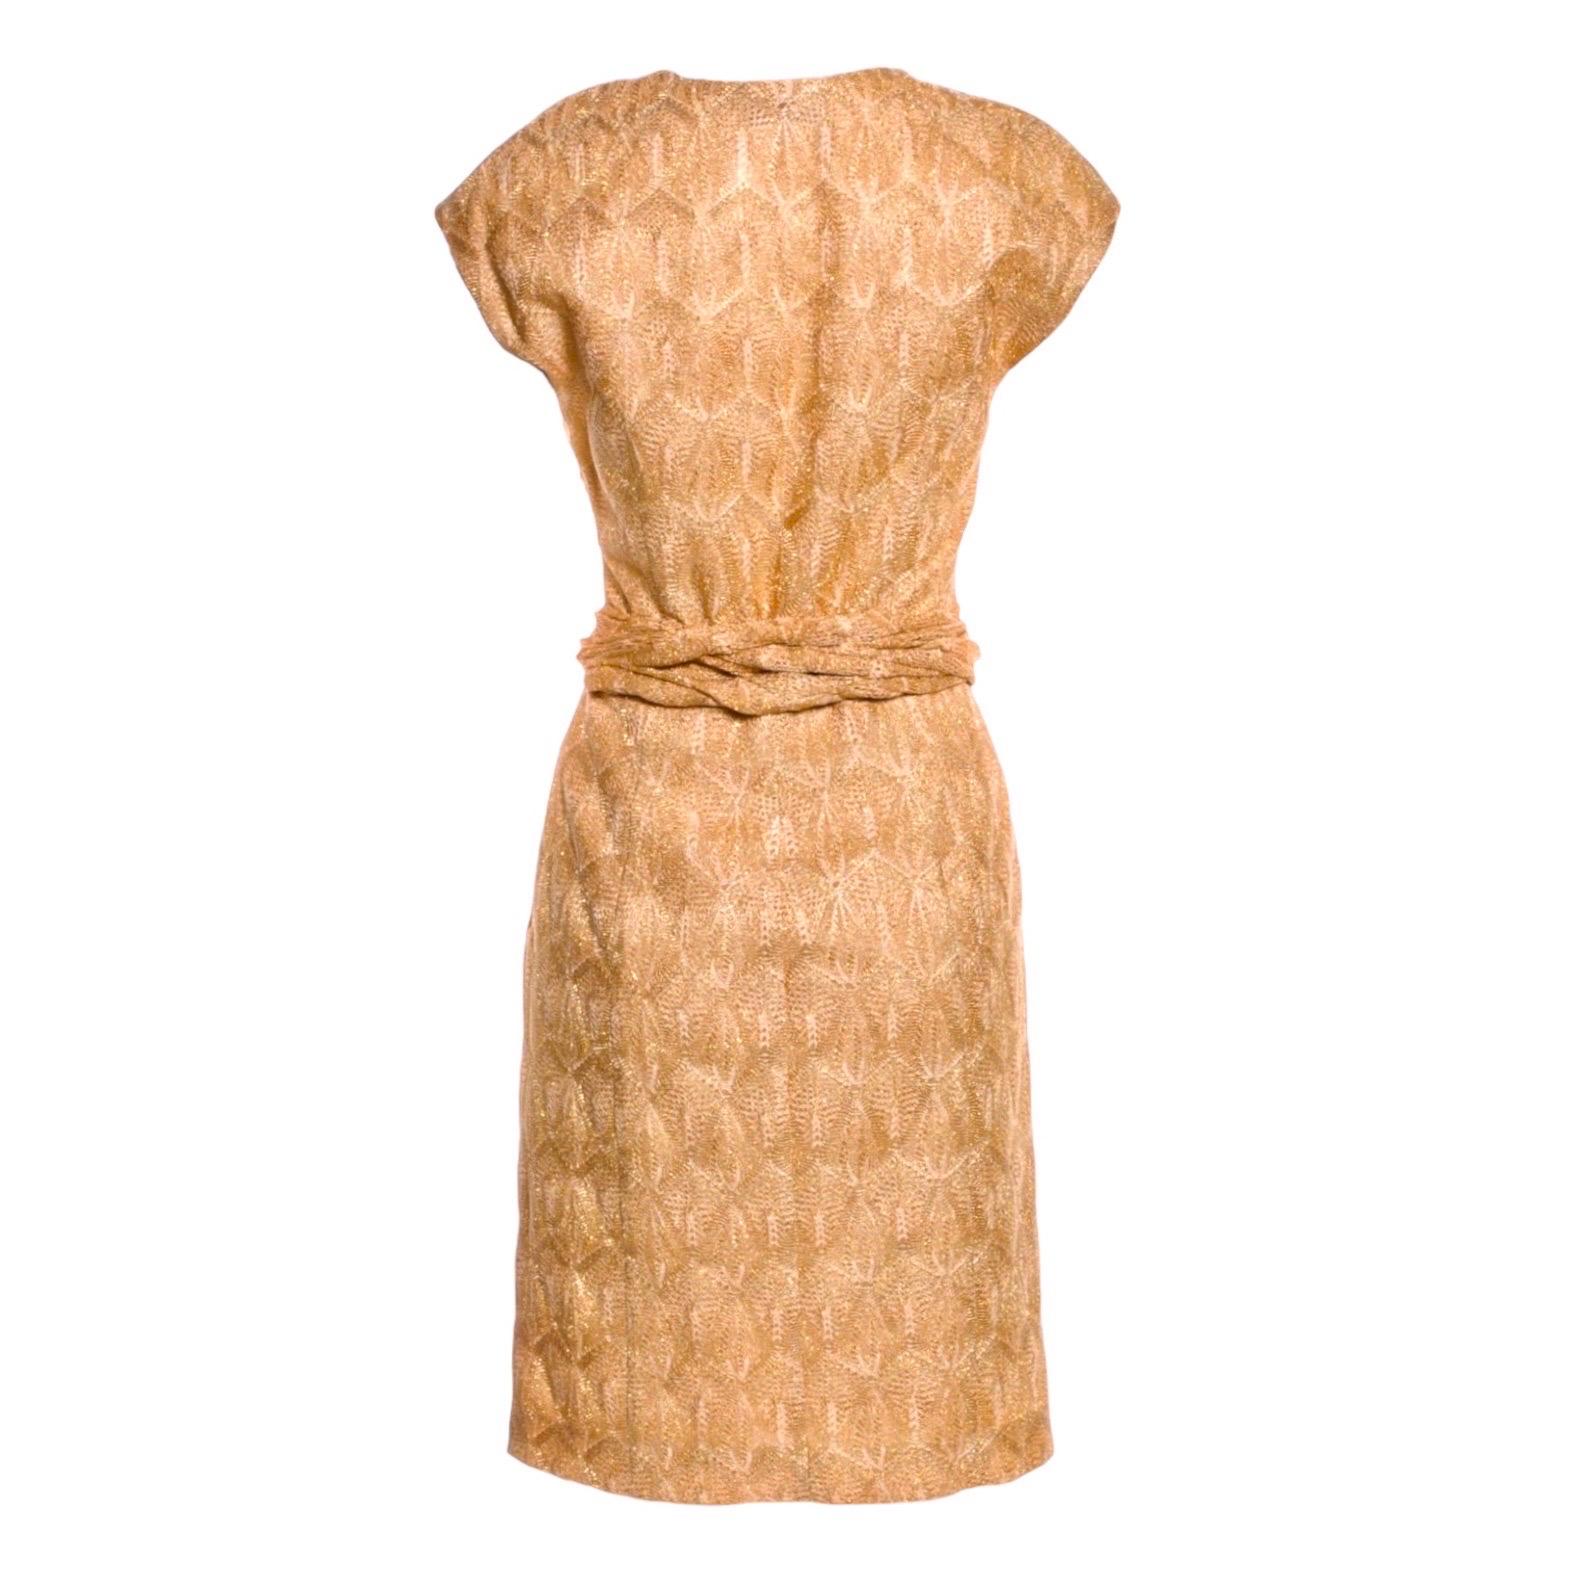 UNIQUE & LUXURIOUS
METALLIC GOLD LUREX DRESS
RARE & SPECIAL PIECE

DETAILS:

Beautiful light gold colored MISSONI dress 
From MISSONI main line
Classic MISSONI signature knit
Timeless style 
Crochet-knit details - so beautiful!
Comes with matching